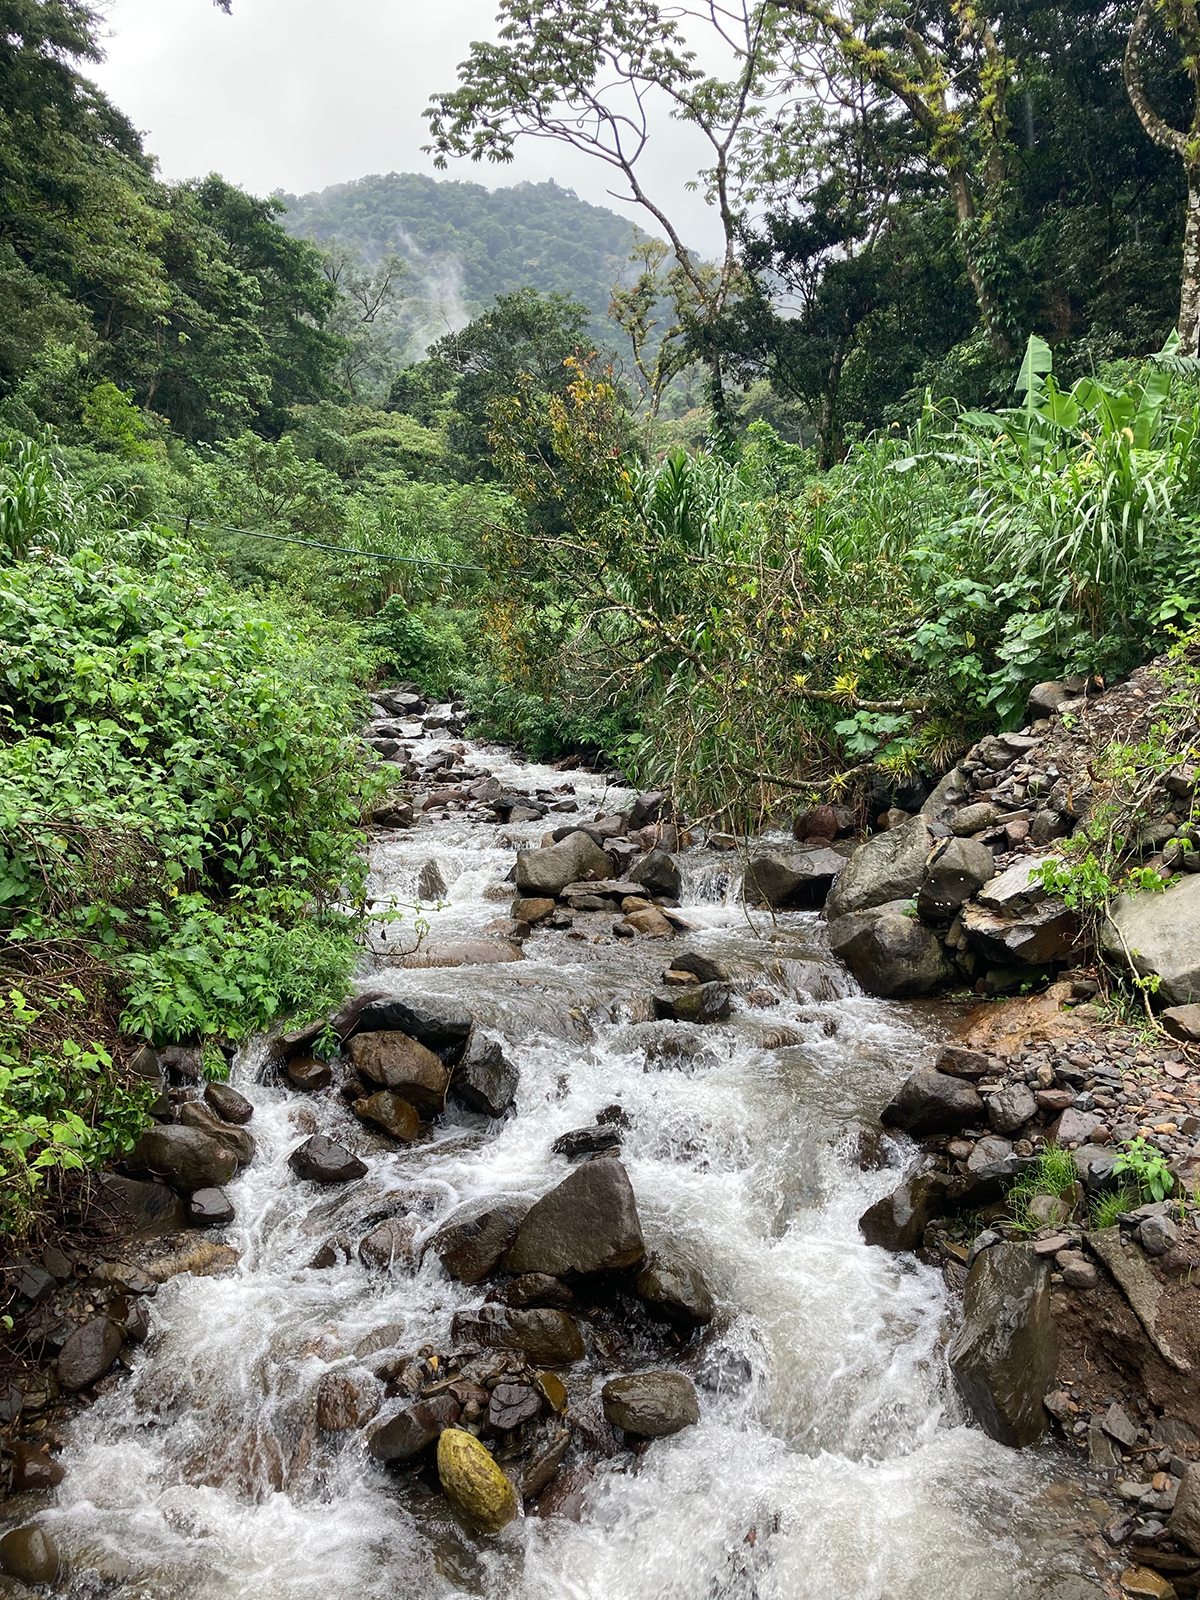 The Effect of Discharge on Leaf Litter Decomposition in Tropical Streams